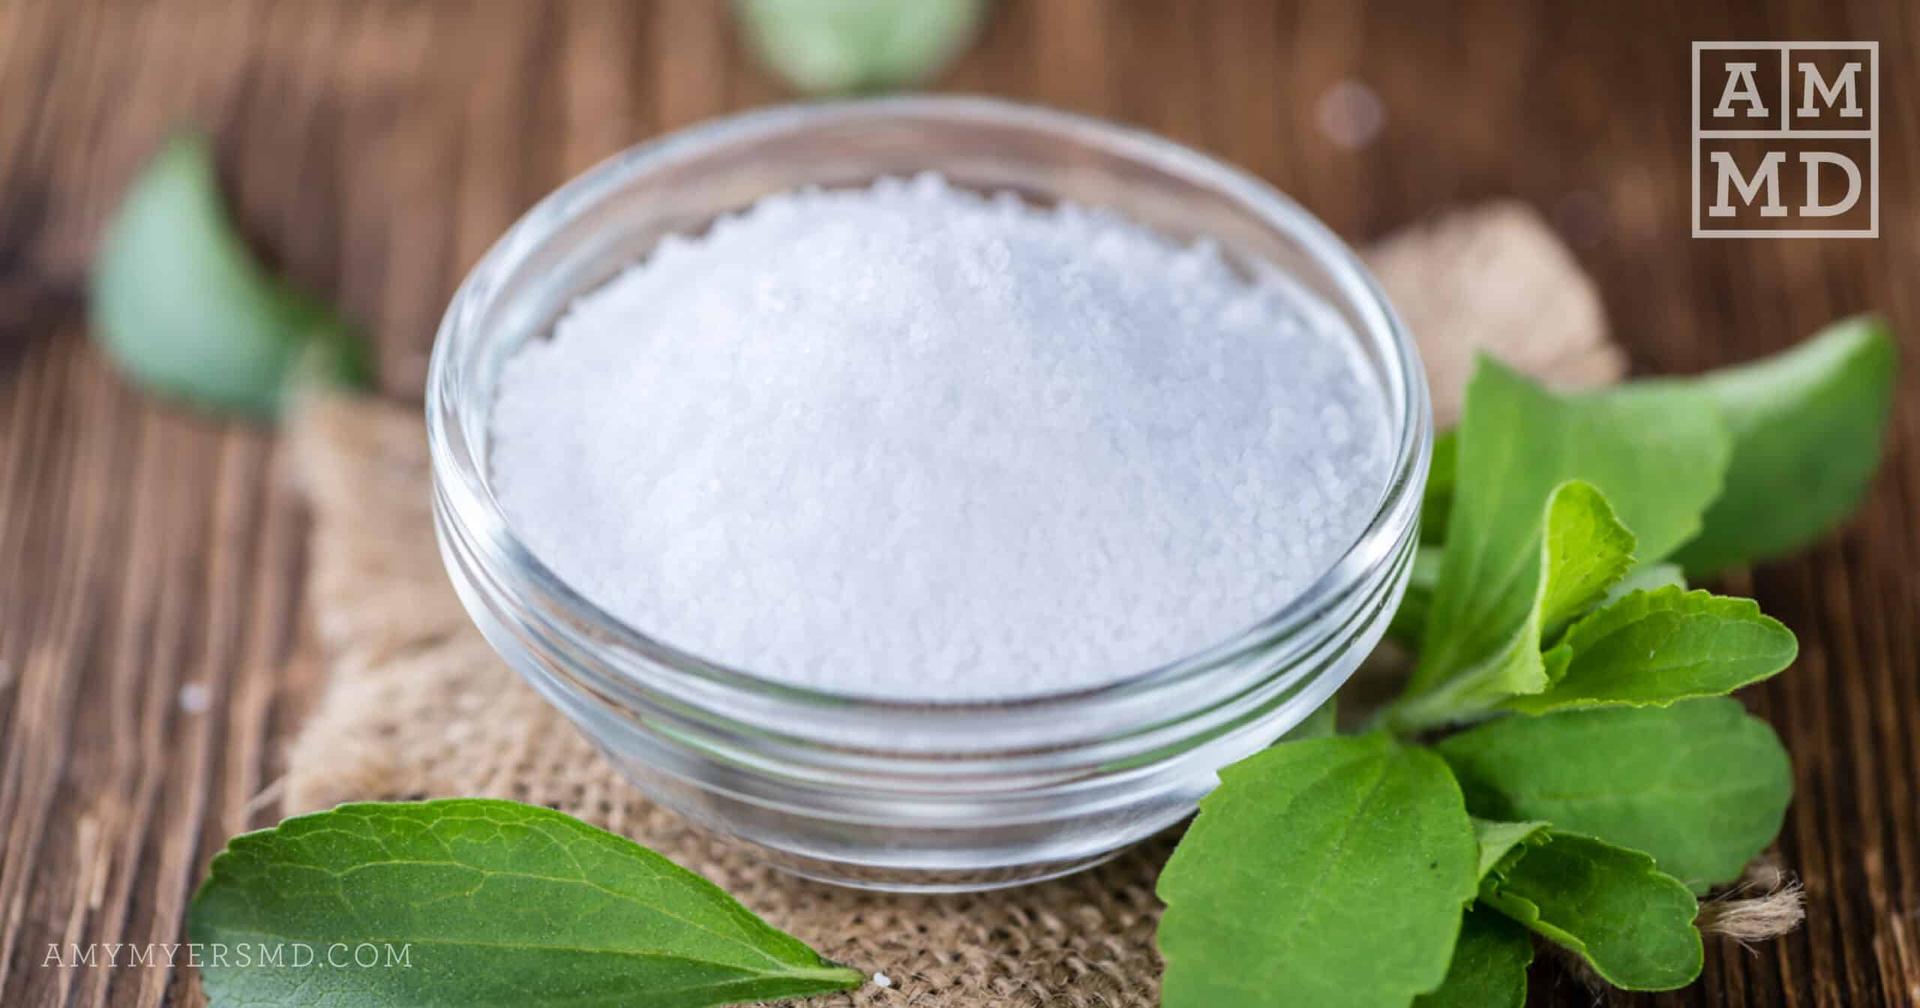 What Are the Benefits of Stevia Leaf